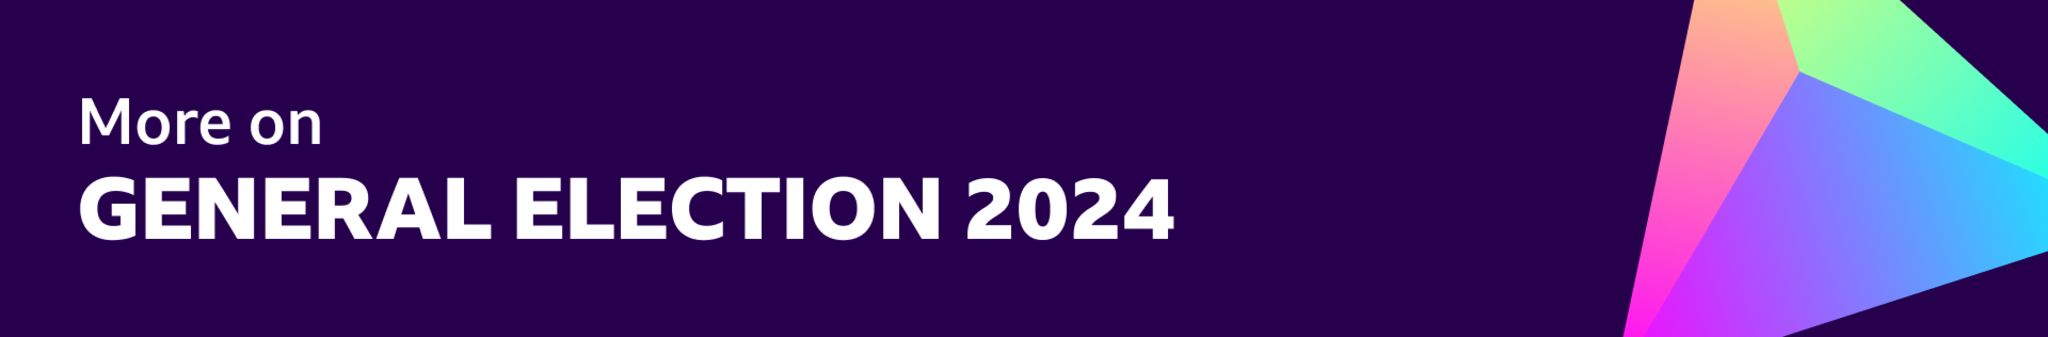 Text says "More on general election 2024"